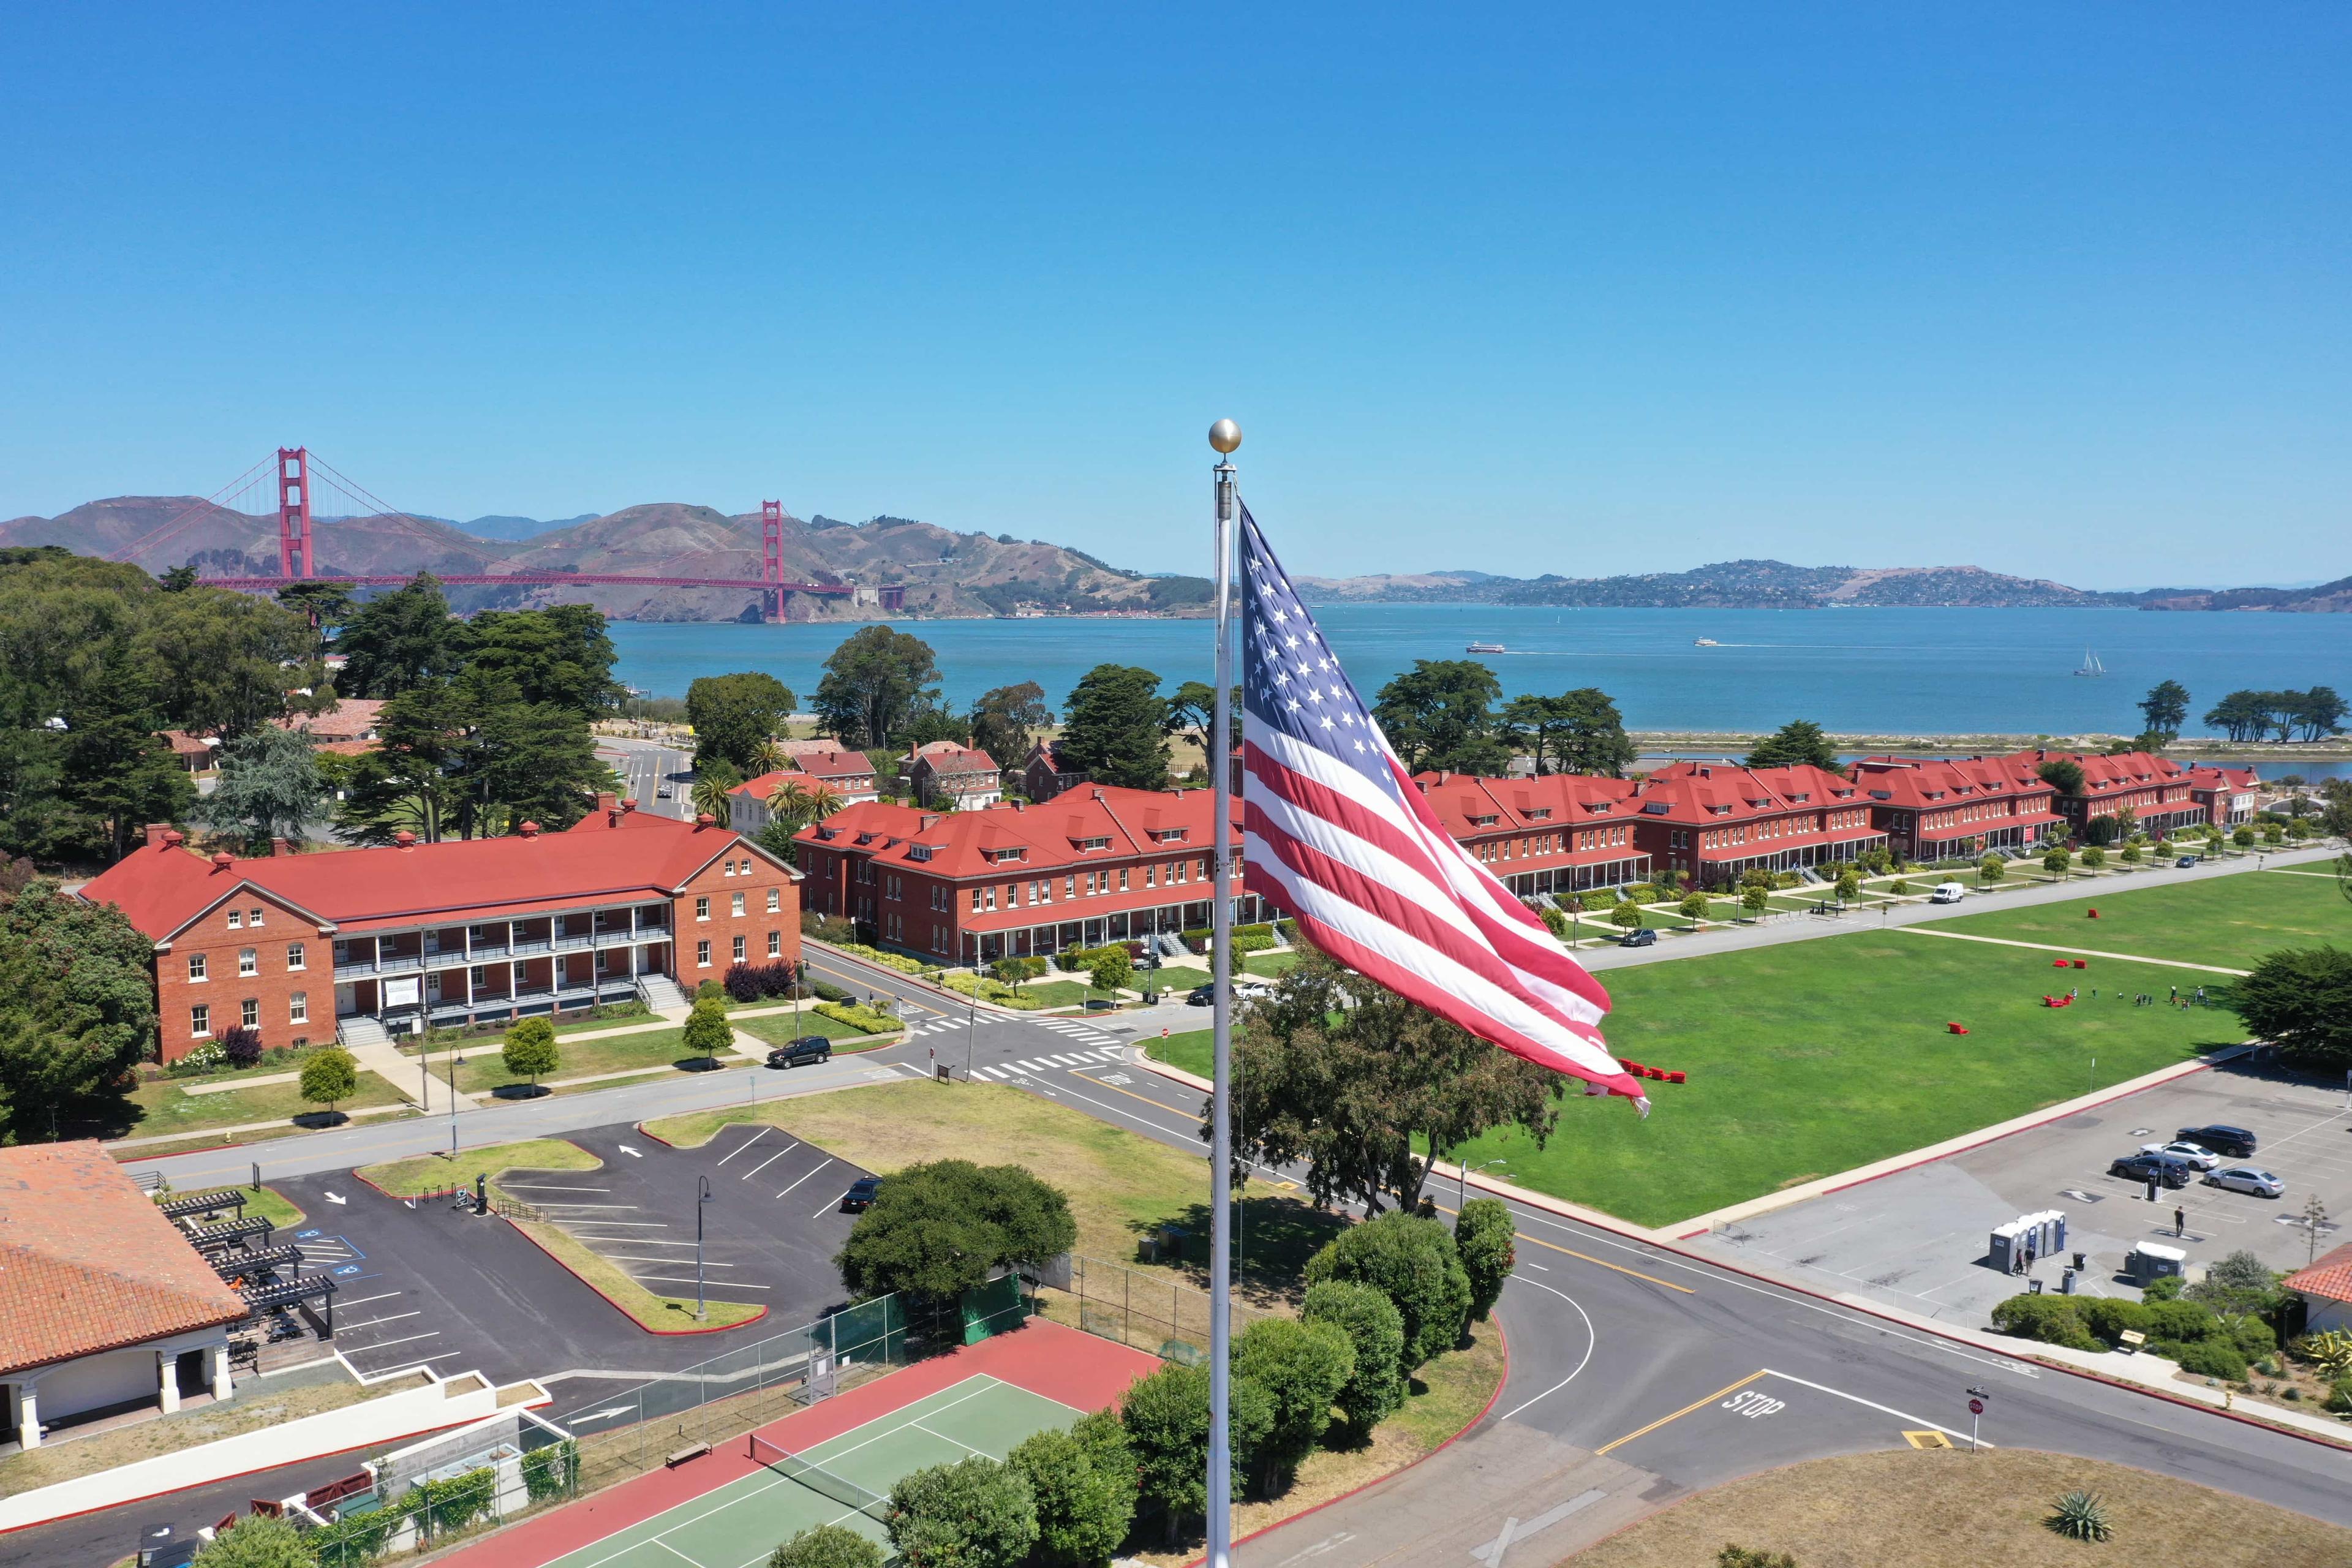 Image of American flag waving in foreground with historic barracks, the Main Parade Ground of the Presidio and the Golden Gate Bridge in the background.